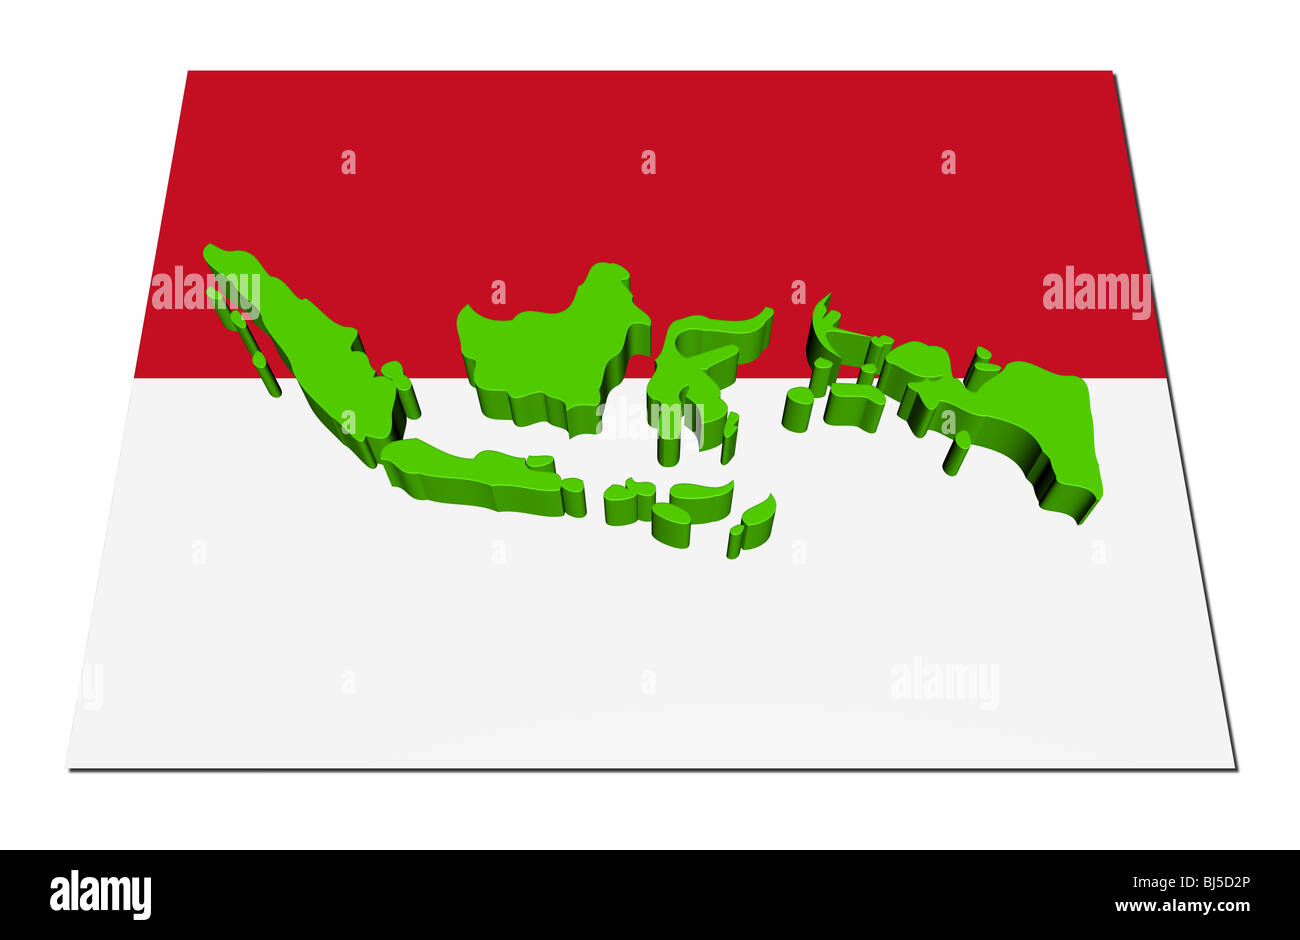 Indonesia 3d render map on their flag illustration Stock Photo